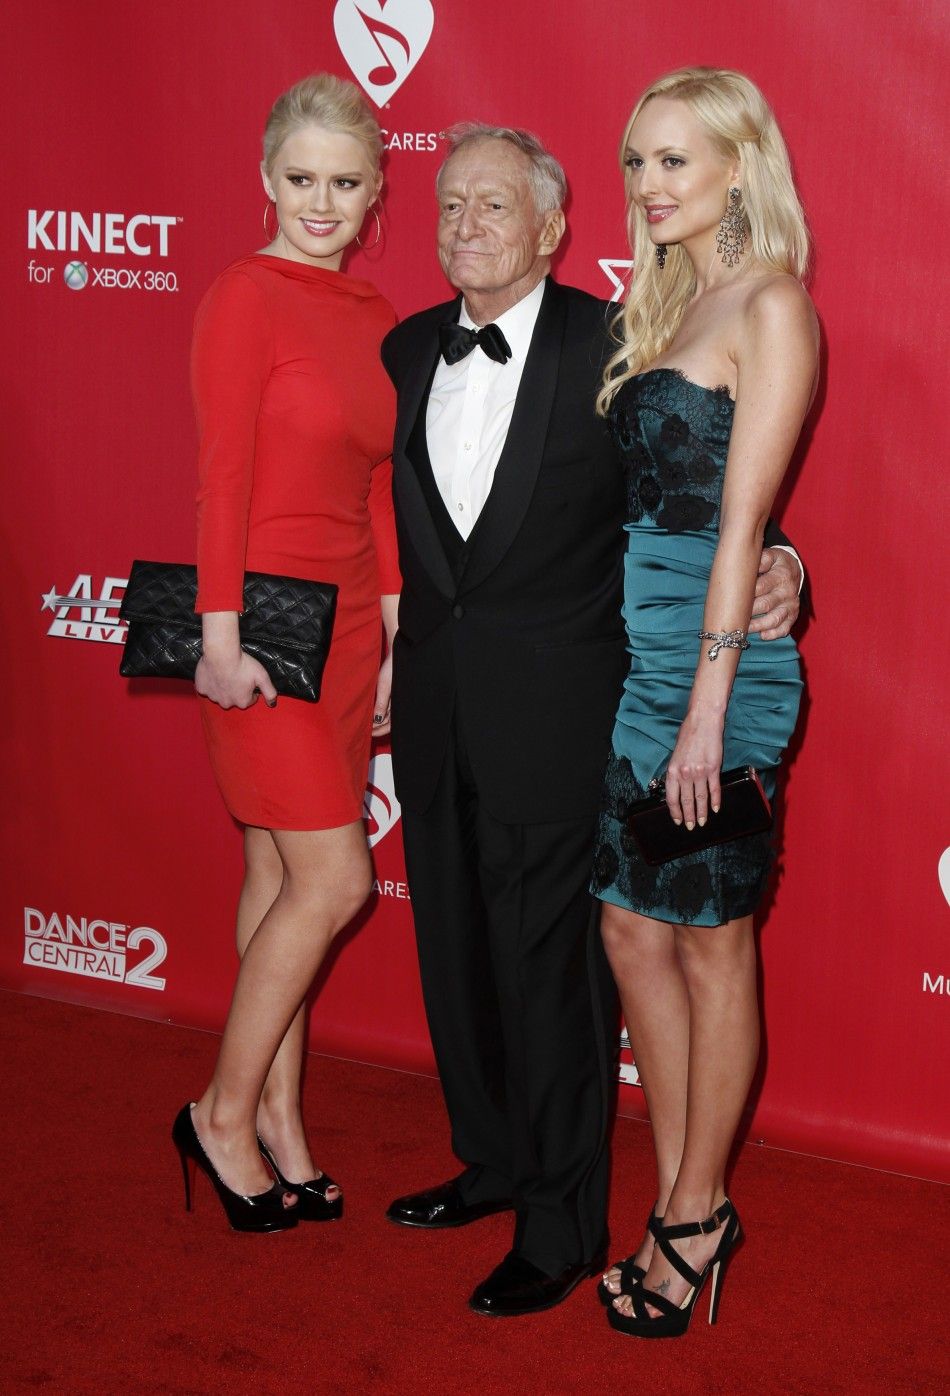 Anna Berglund L, Hugh Hefner C, and Shera Bechard pose at the 2012 MusiCares Person of the Year tribute honoring Paul McCartney in Los Angeles, February 10, 2012